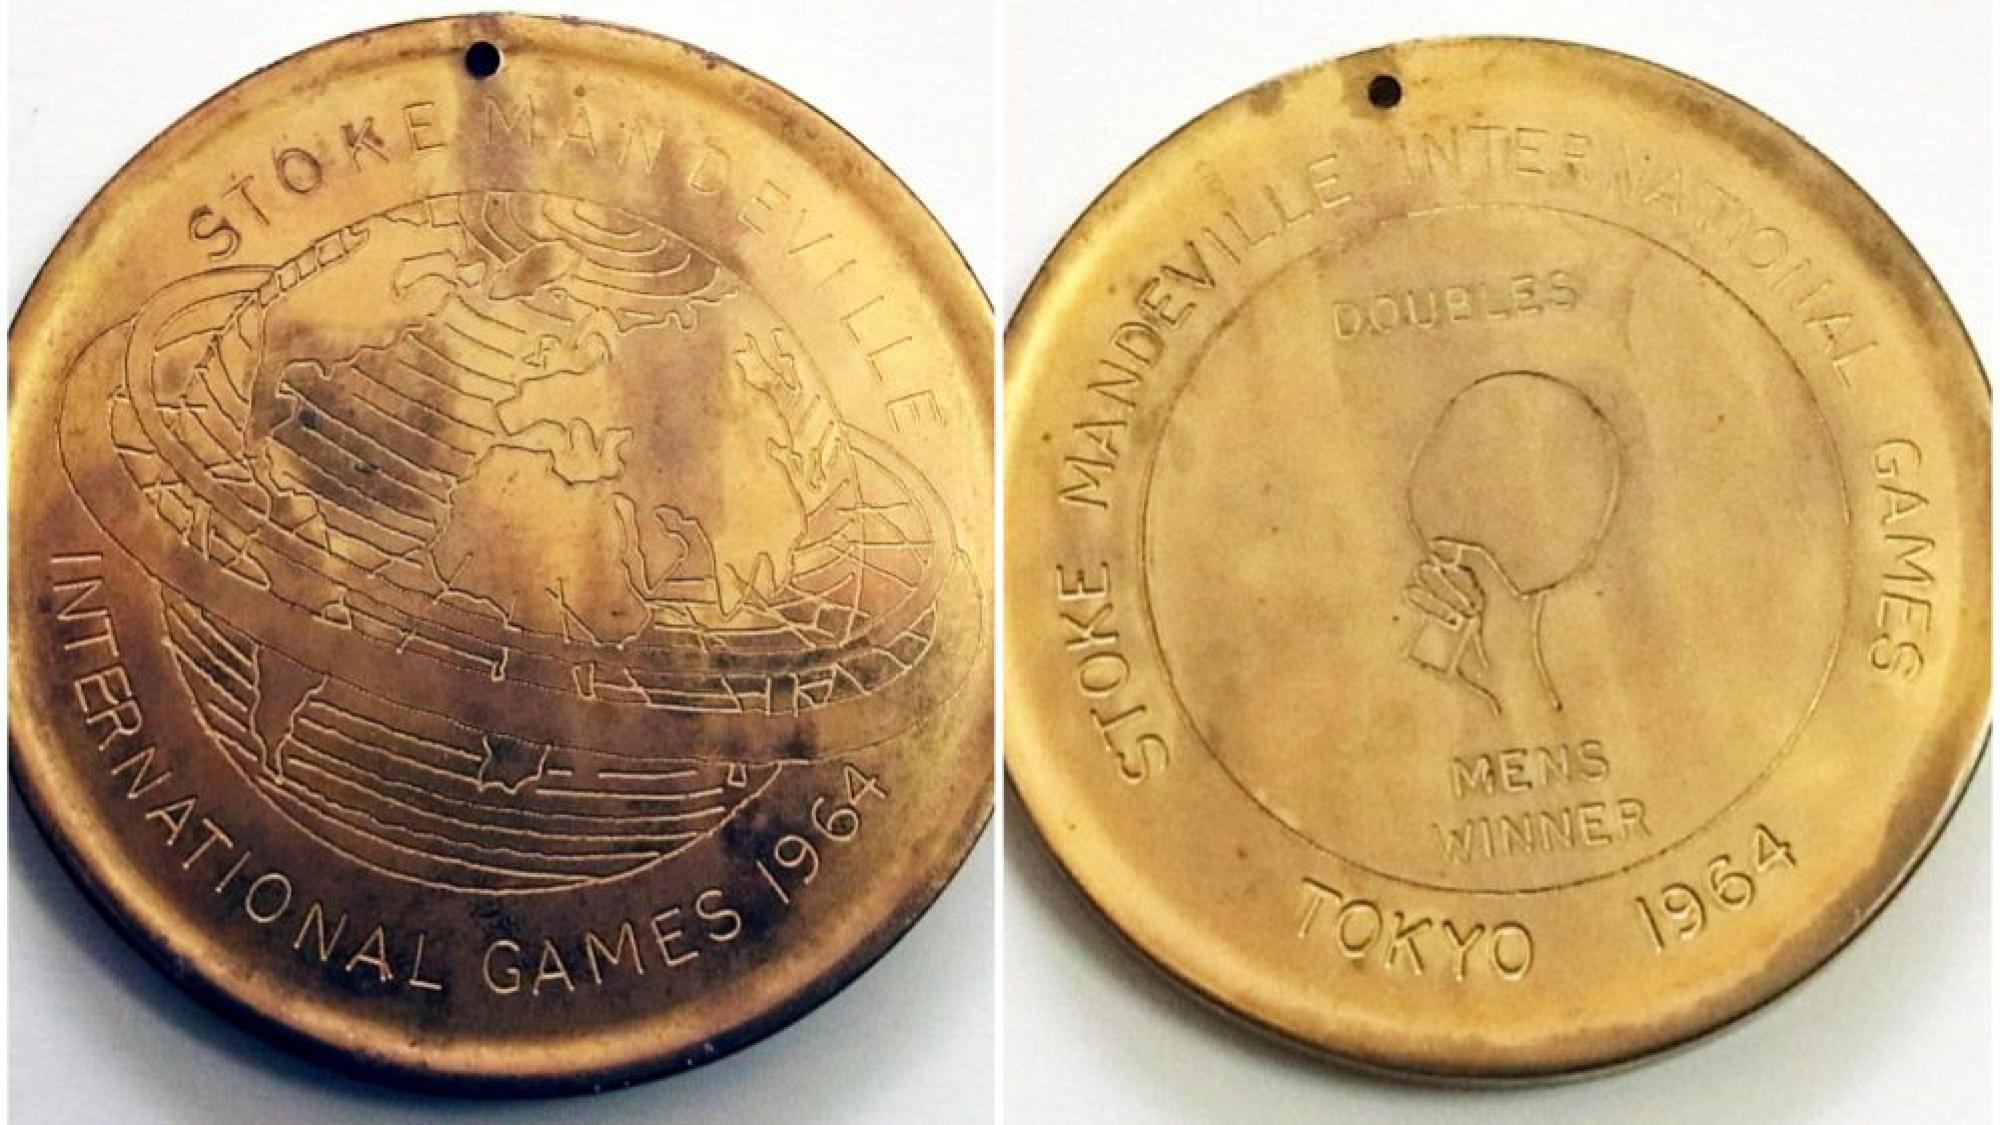 The medals of the Tokyo 1964 Paralympic Games